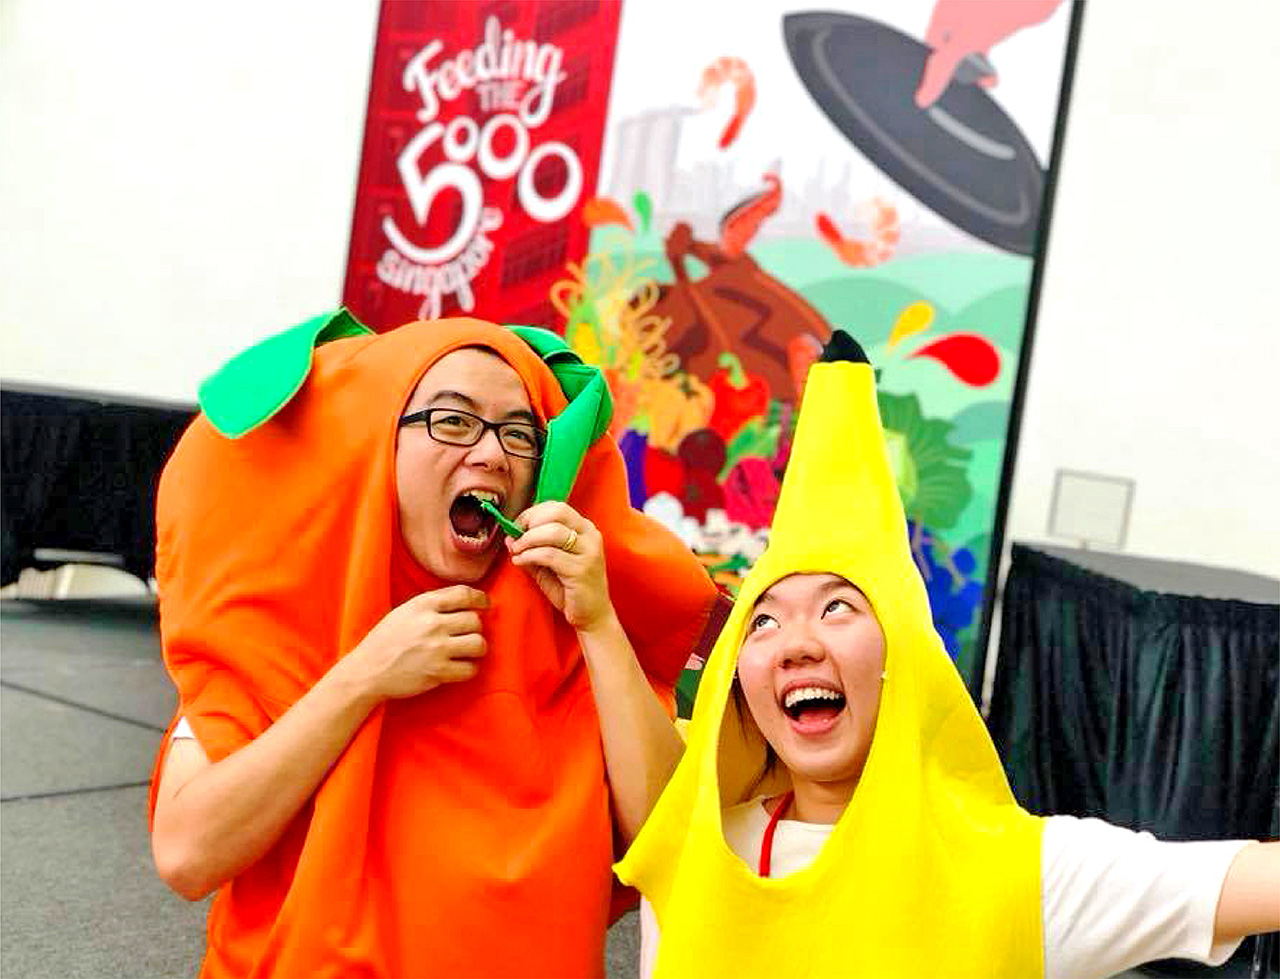 Event mascots donned in fruit costumes at Feeding the 5000 Singapore event